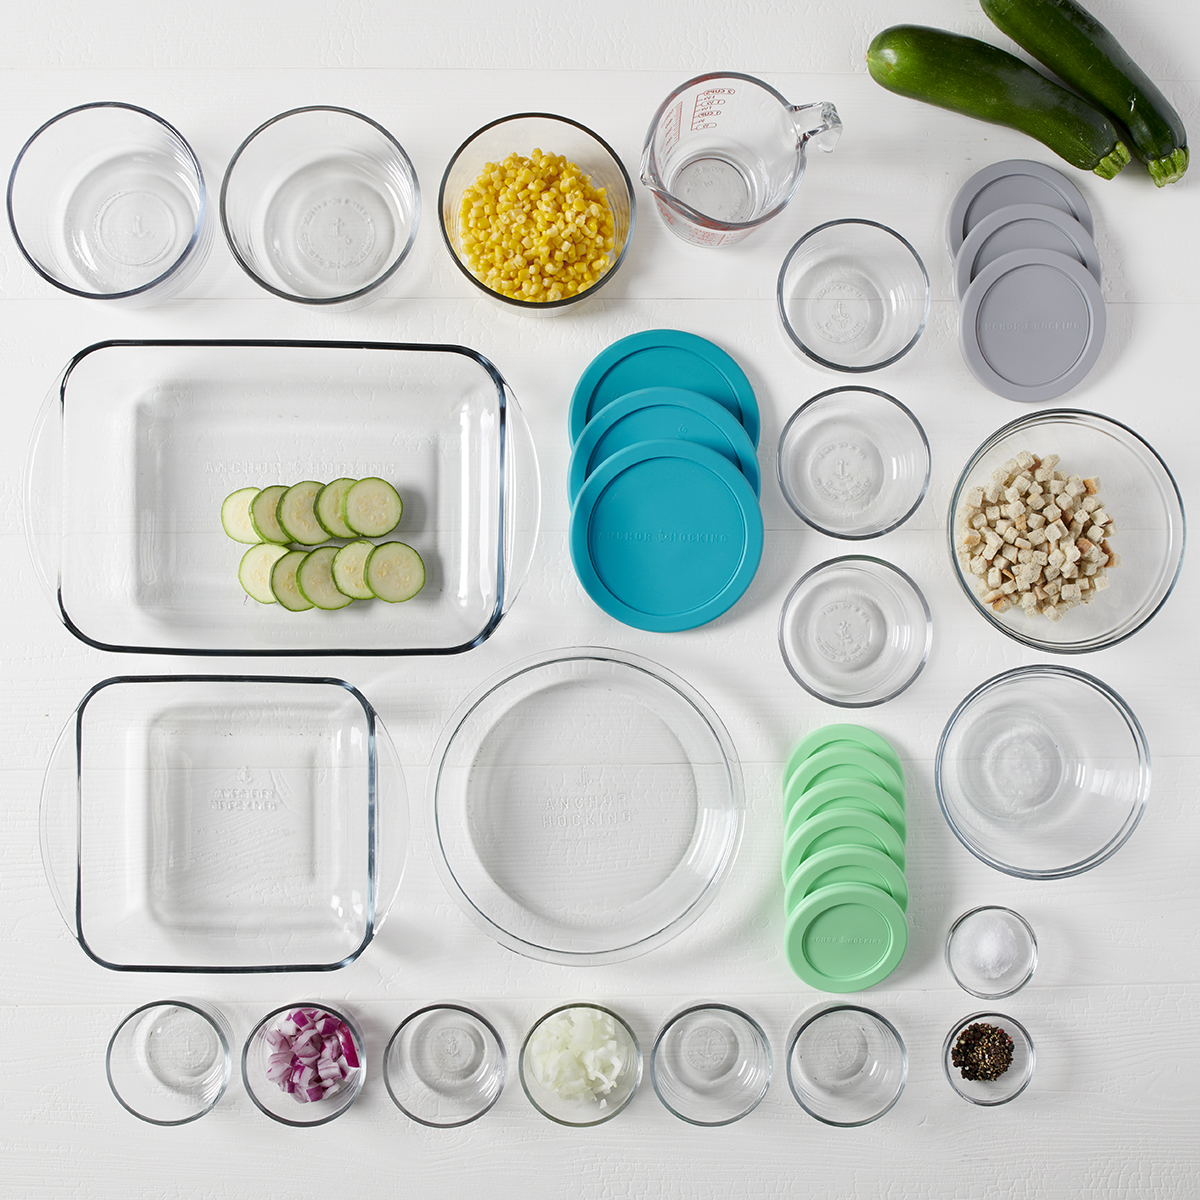 Anchor Hocking Glass Food Storage Containers & Glass Baking Dishes, 32 Piece Set - image 4 of 6